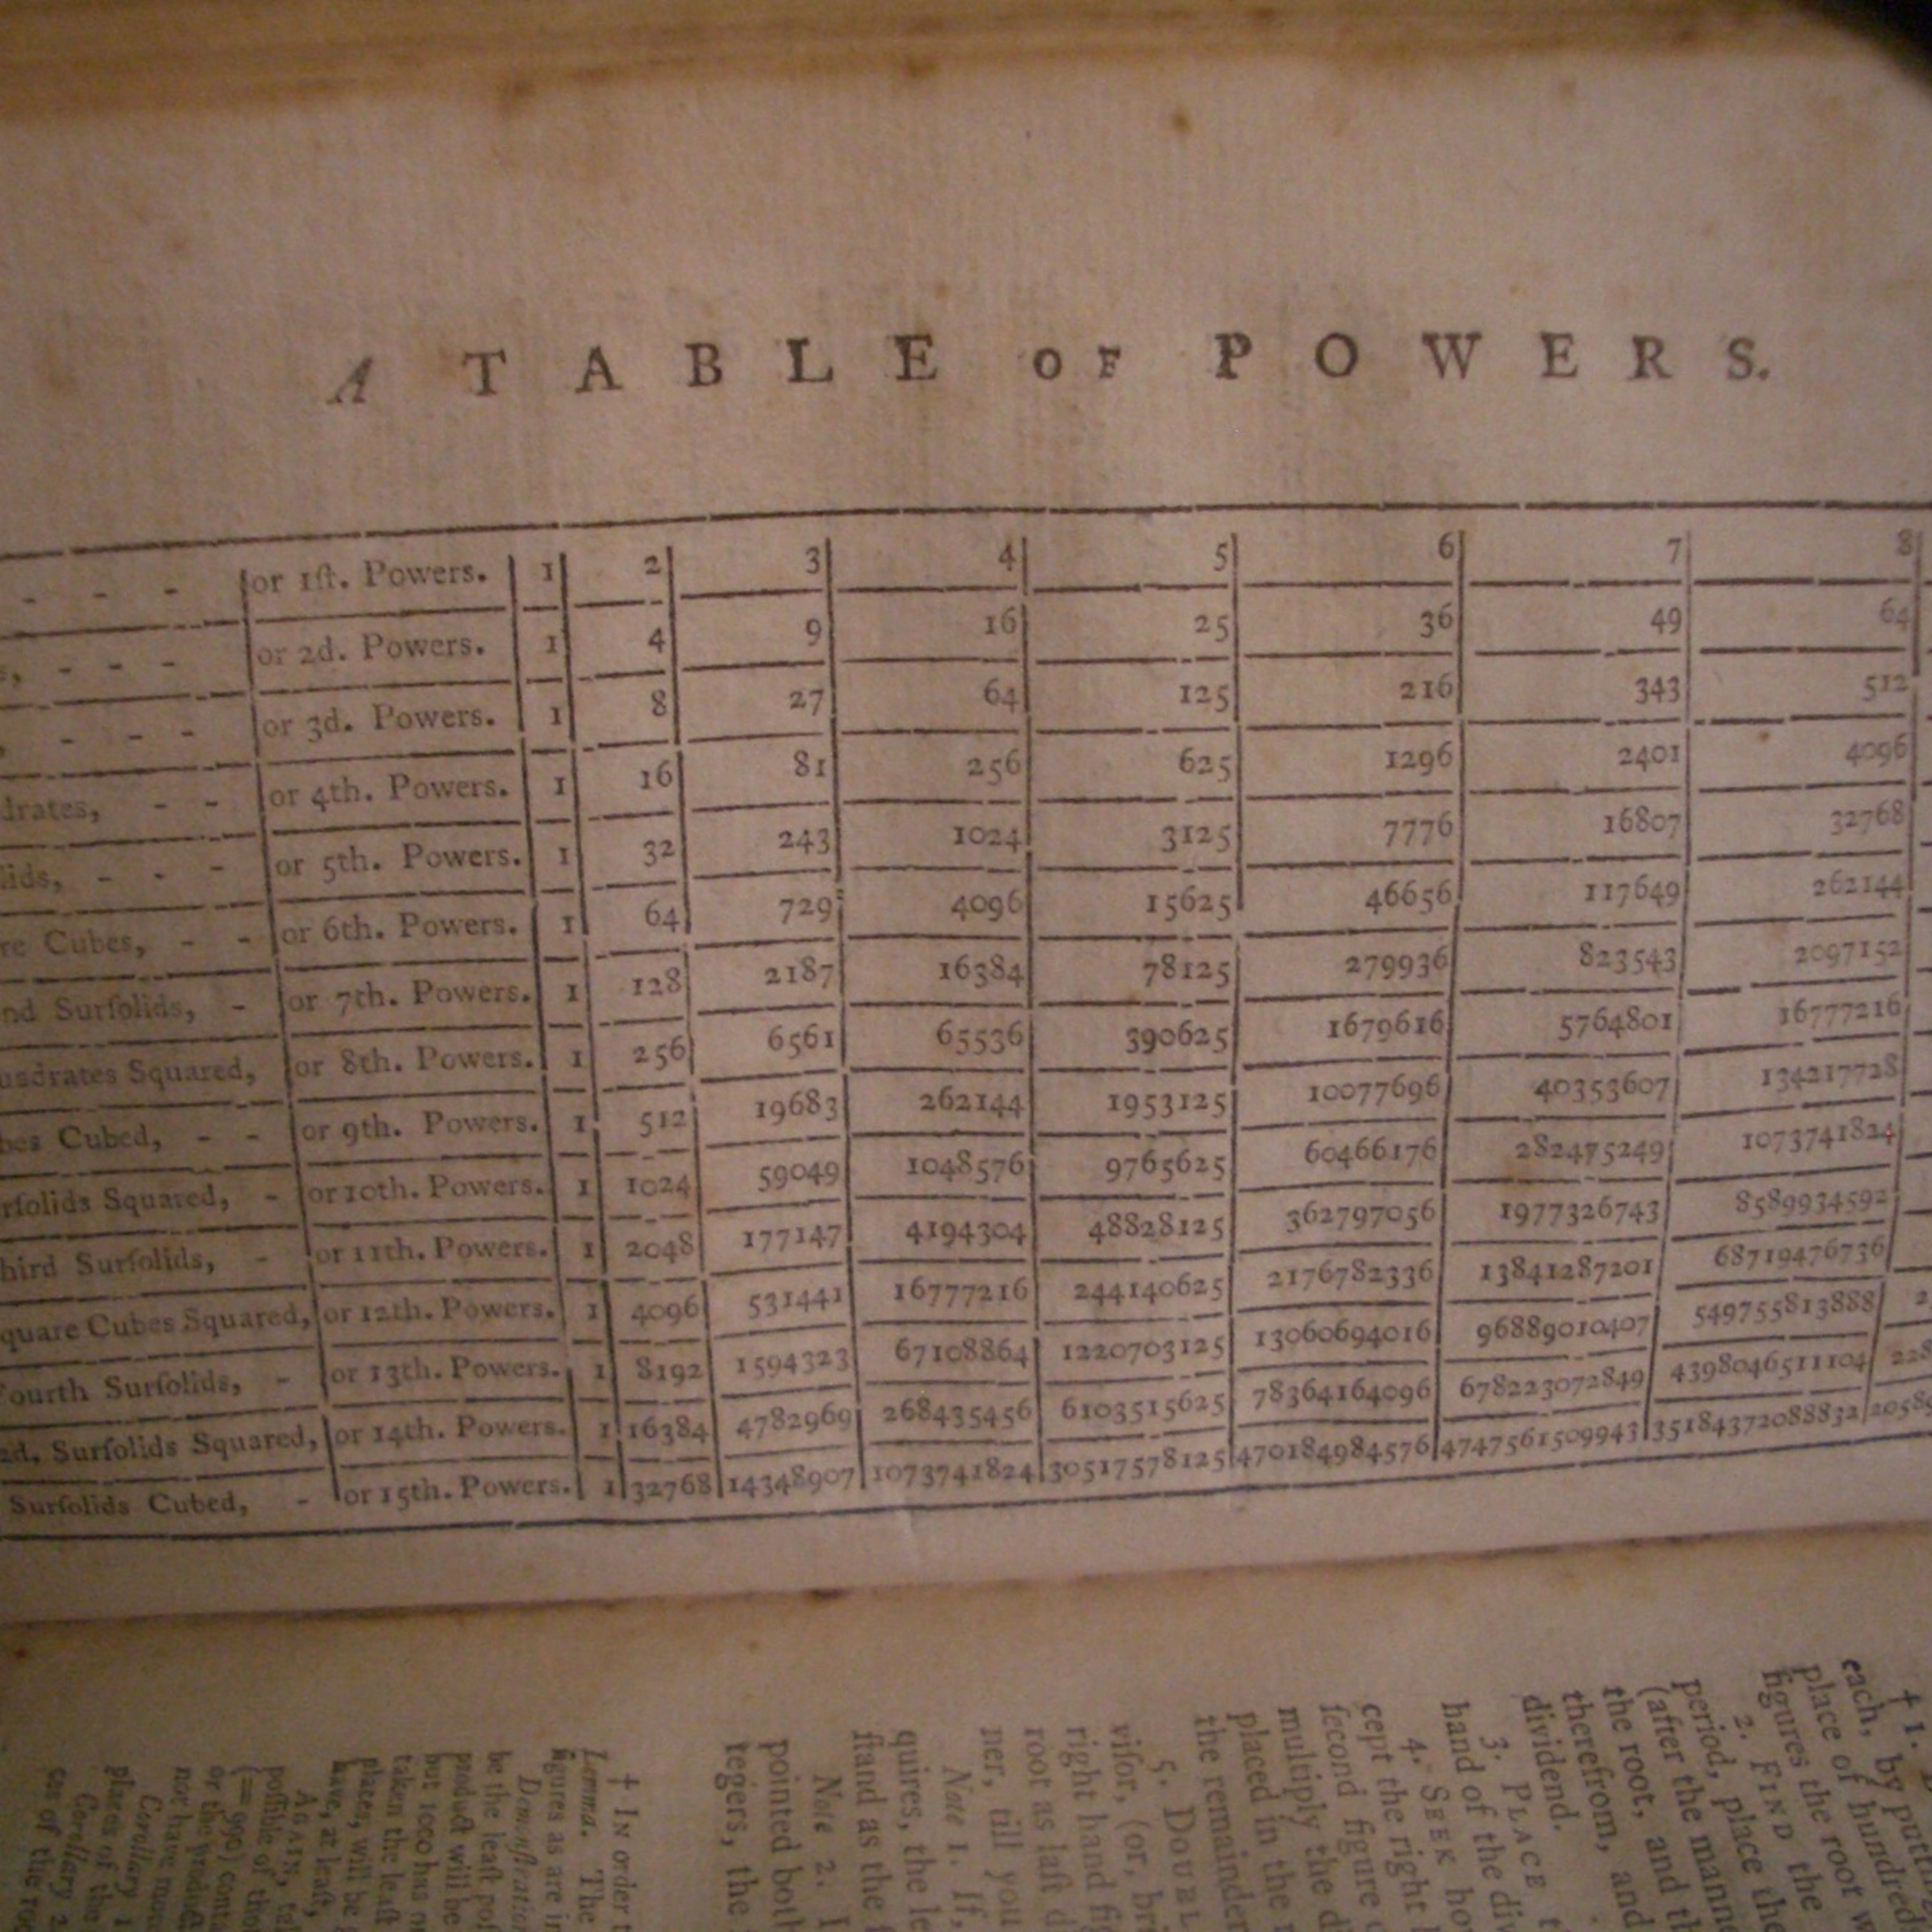 Table of Powers from Pike